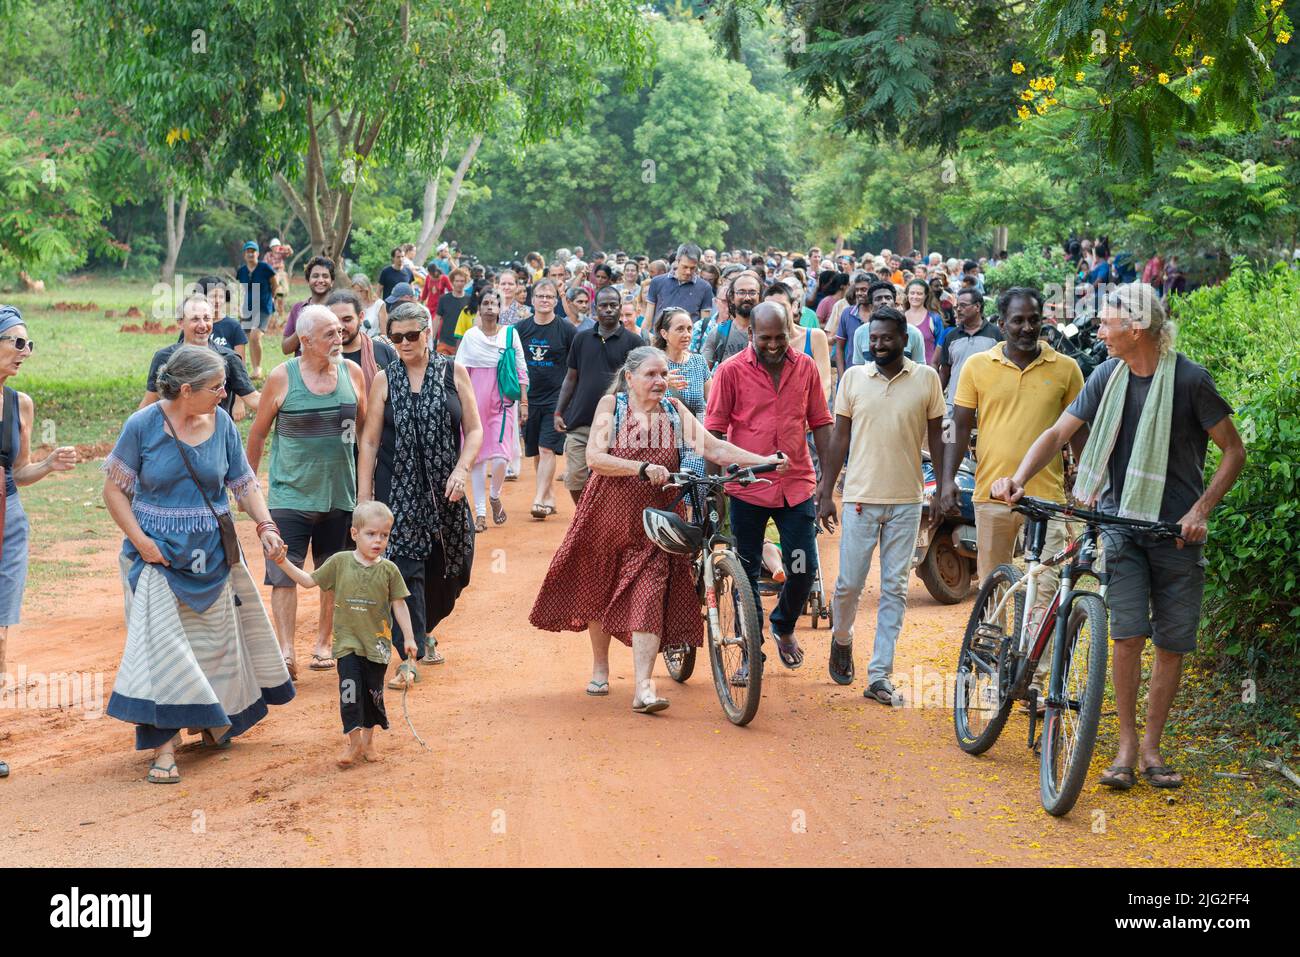 Auroville, India - 2nd July 2022: 500 aurovilians walked to the Banyan tree in response to the threat Auroville is currently facing and to support the Stock Photo